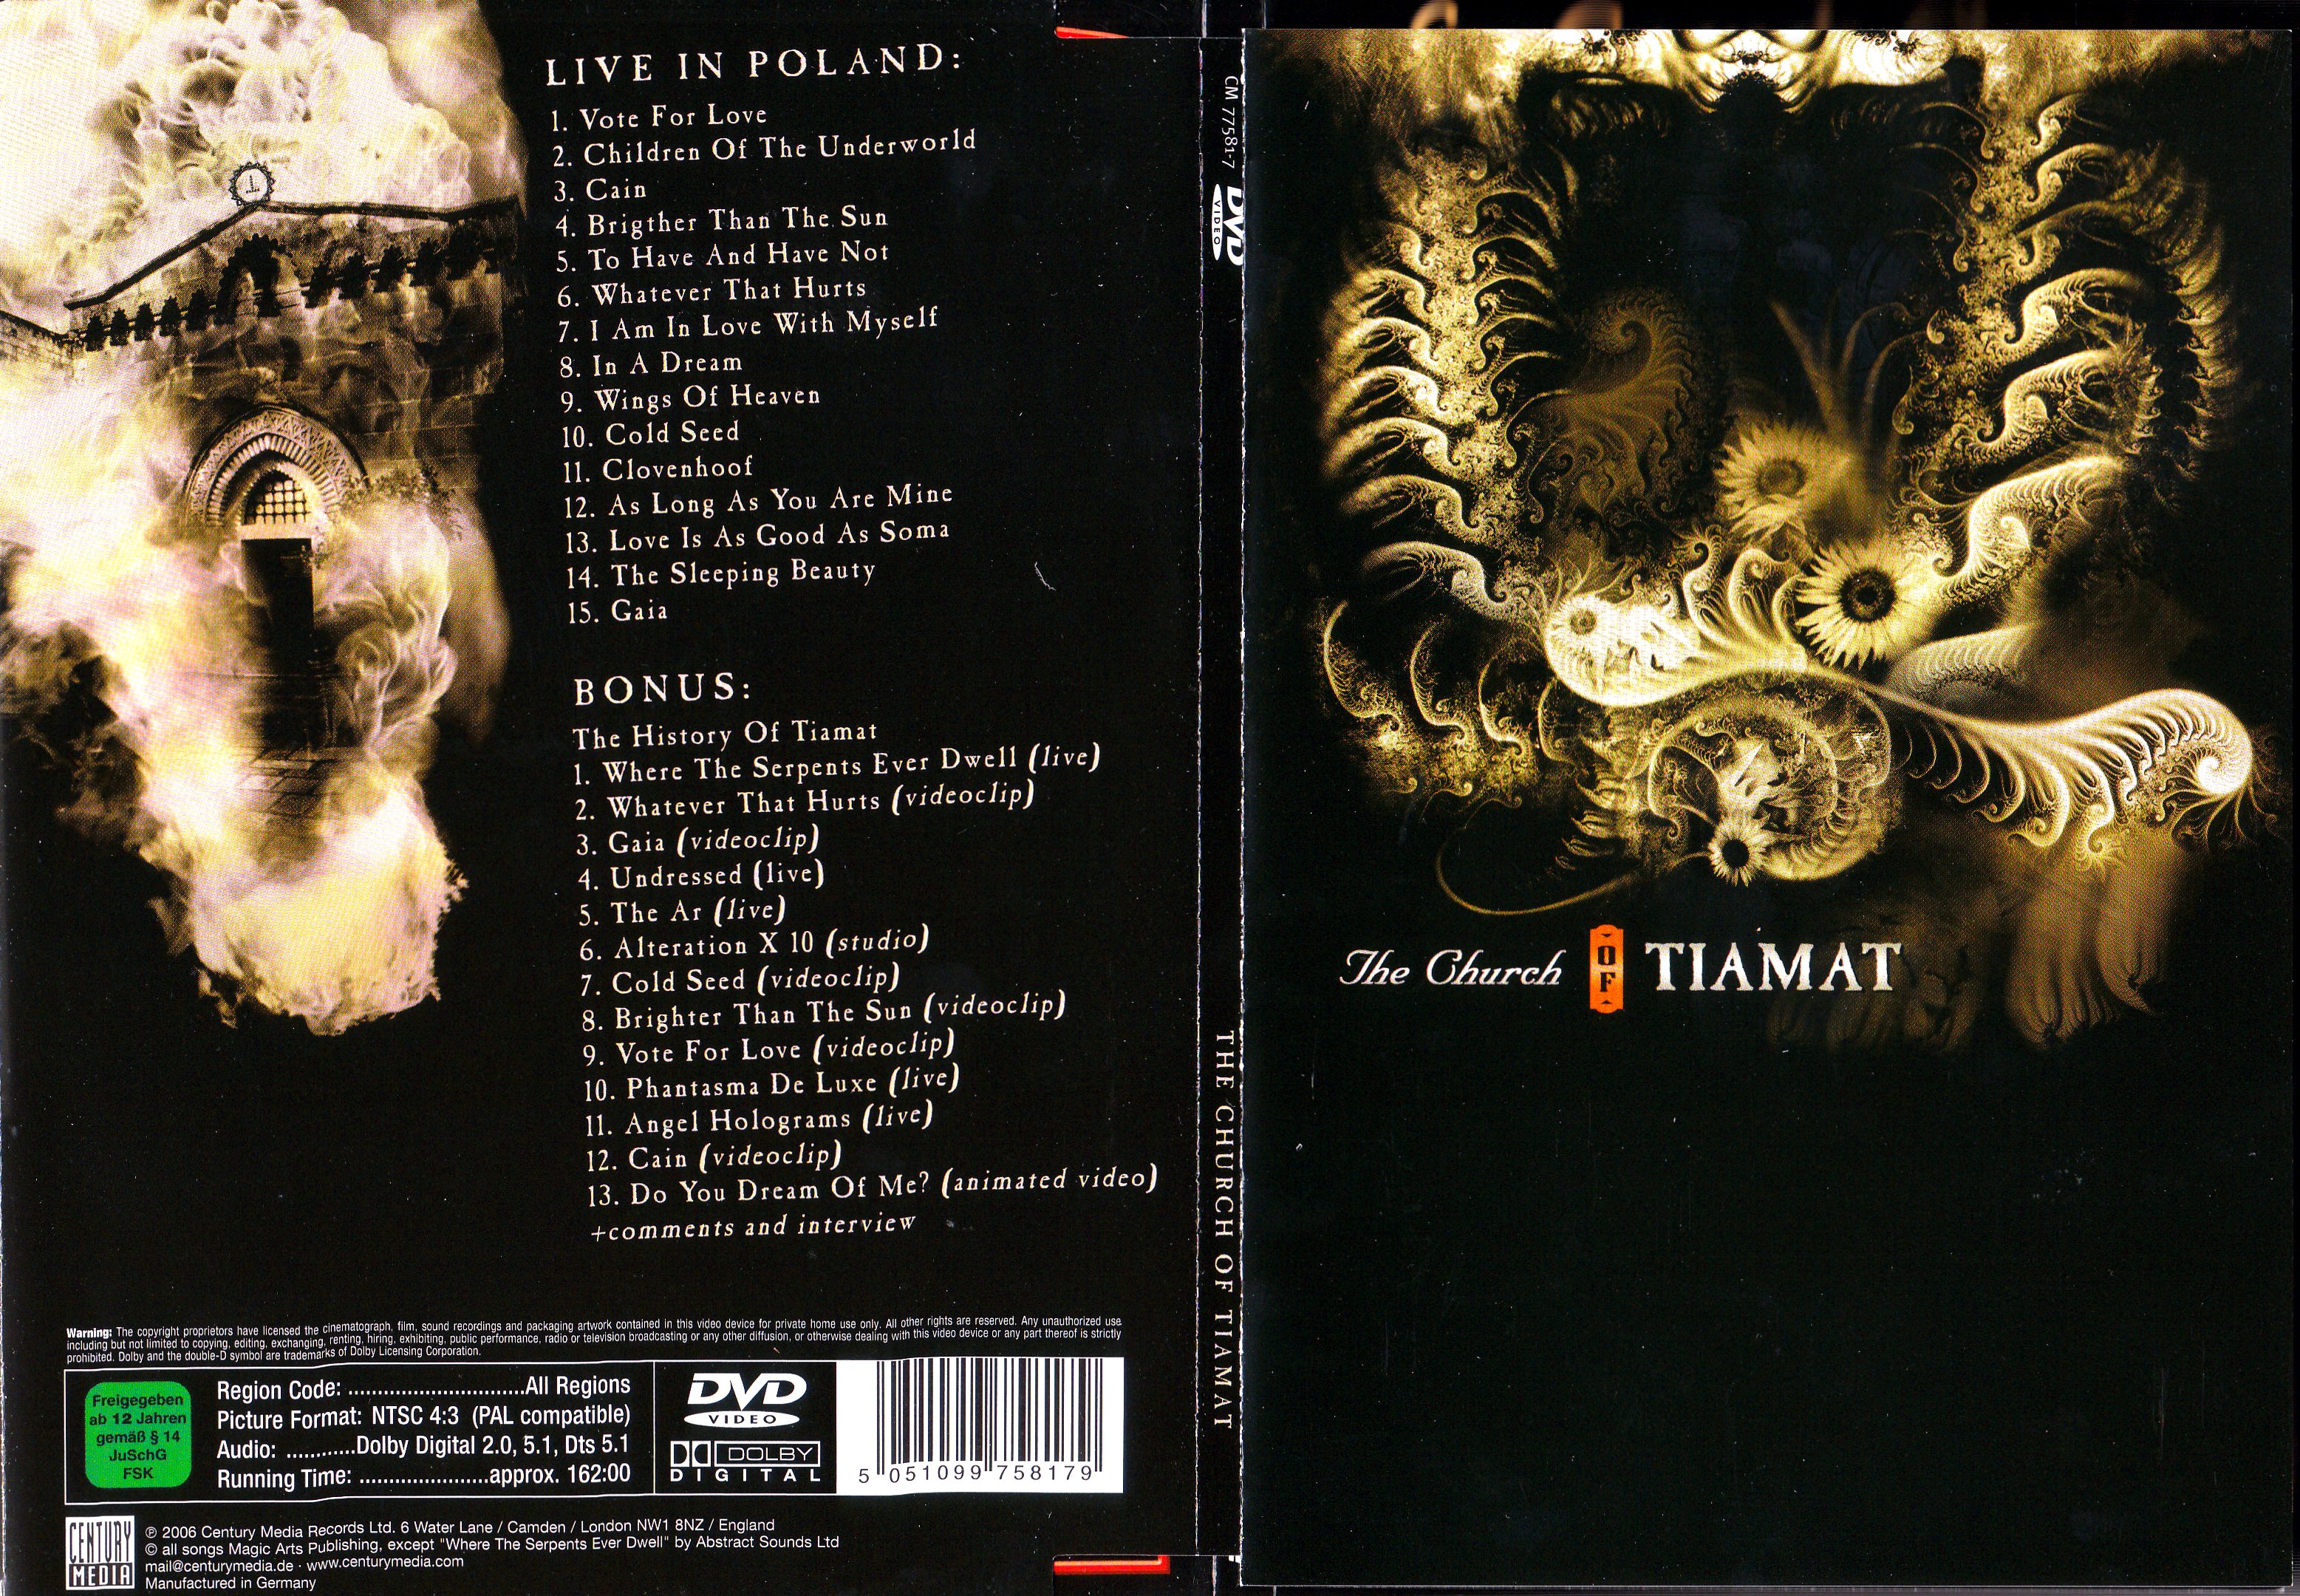 Jaquette DVD The church of Tiamat